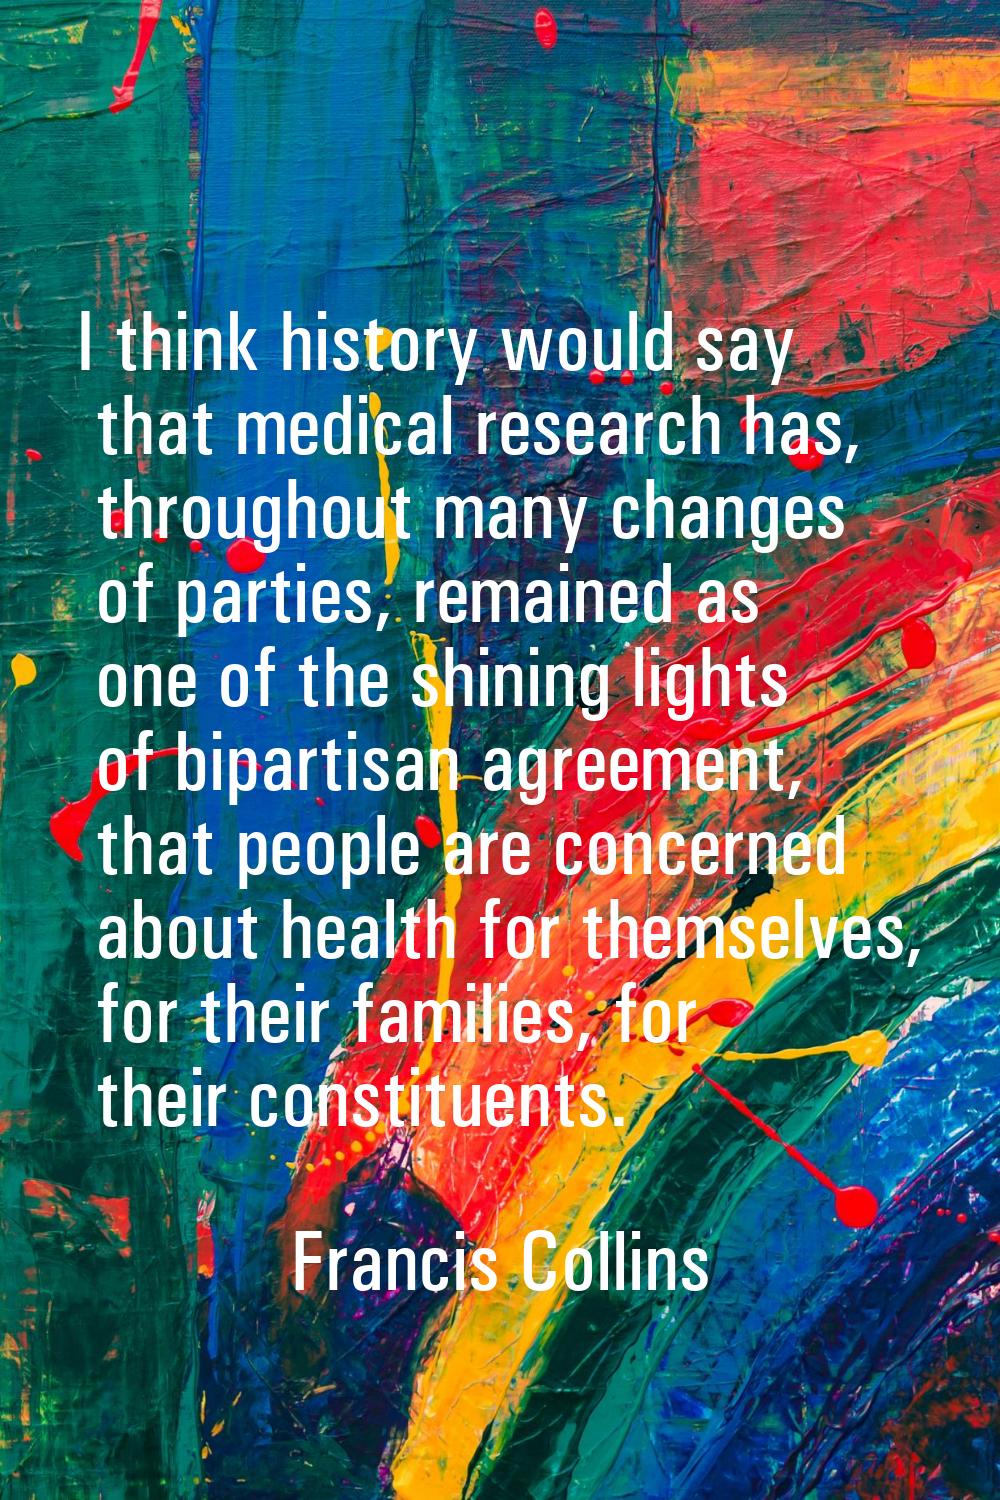 I think history would say that medical research has, throughout many changes of parties, remained a